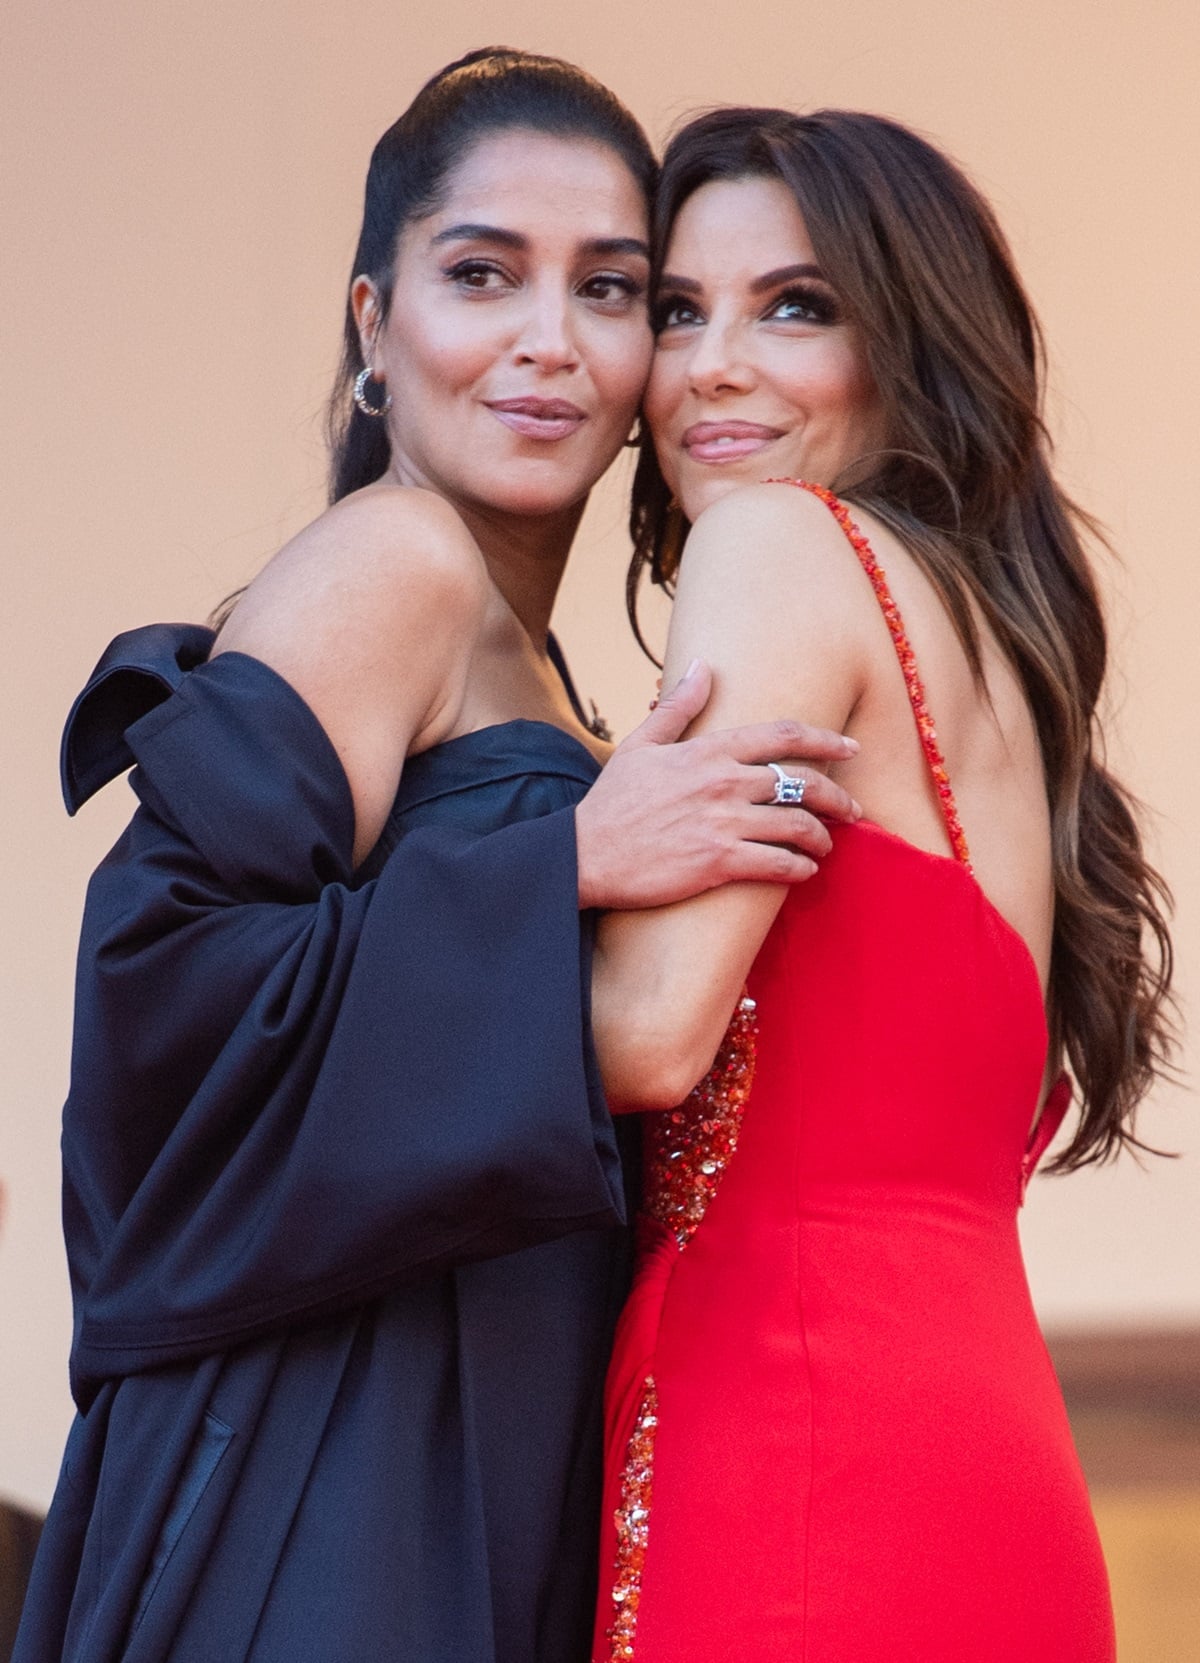 French actress Leila Bekhti and American actress Eva Longoria were among the stars who attended the closing night of the 76th annual Cannes Film Festival